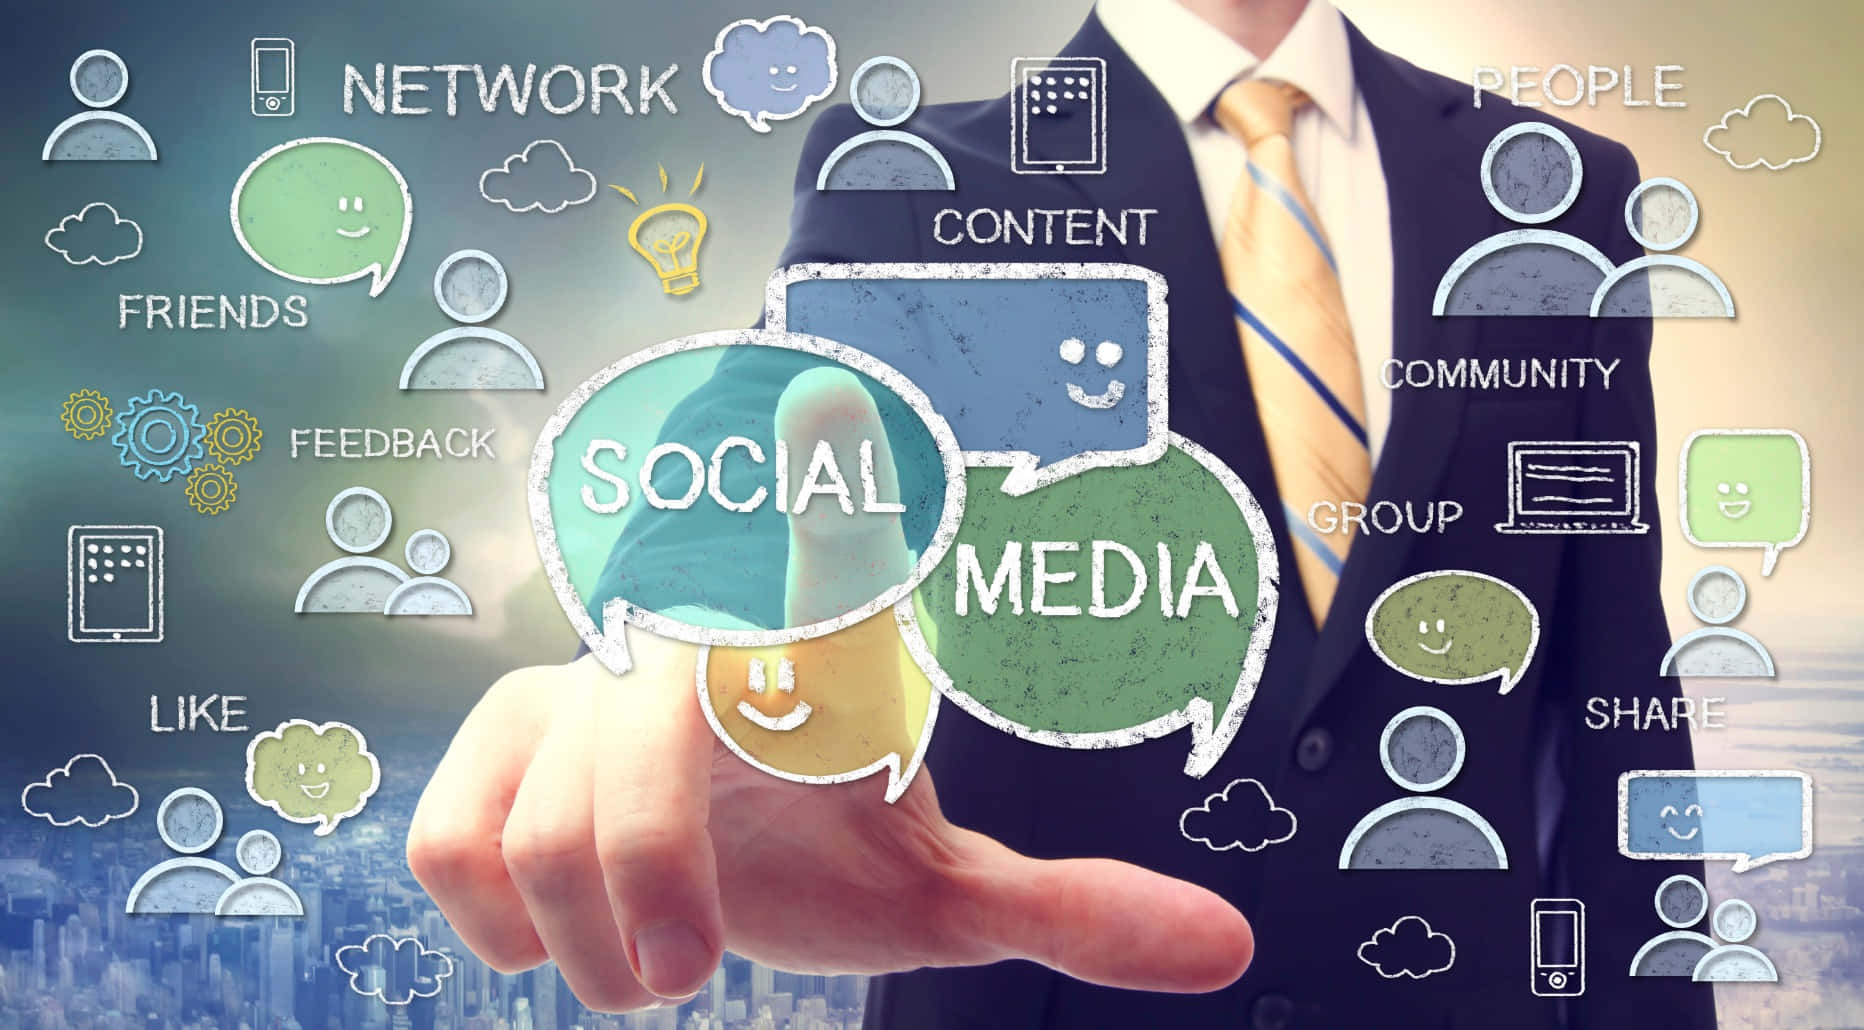 Social Media Marketing - What Is It?